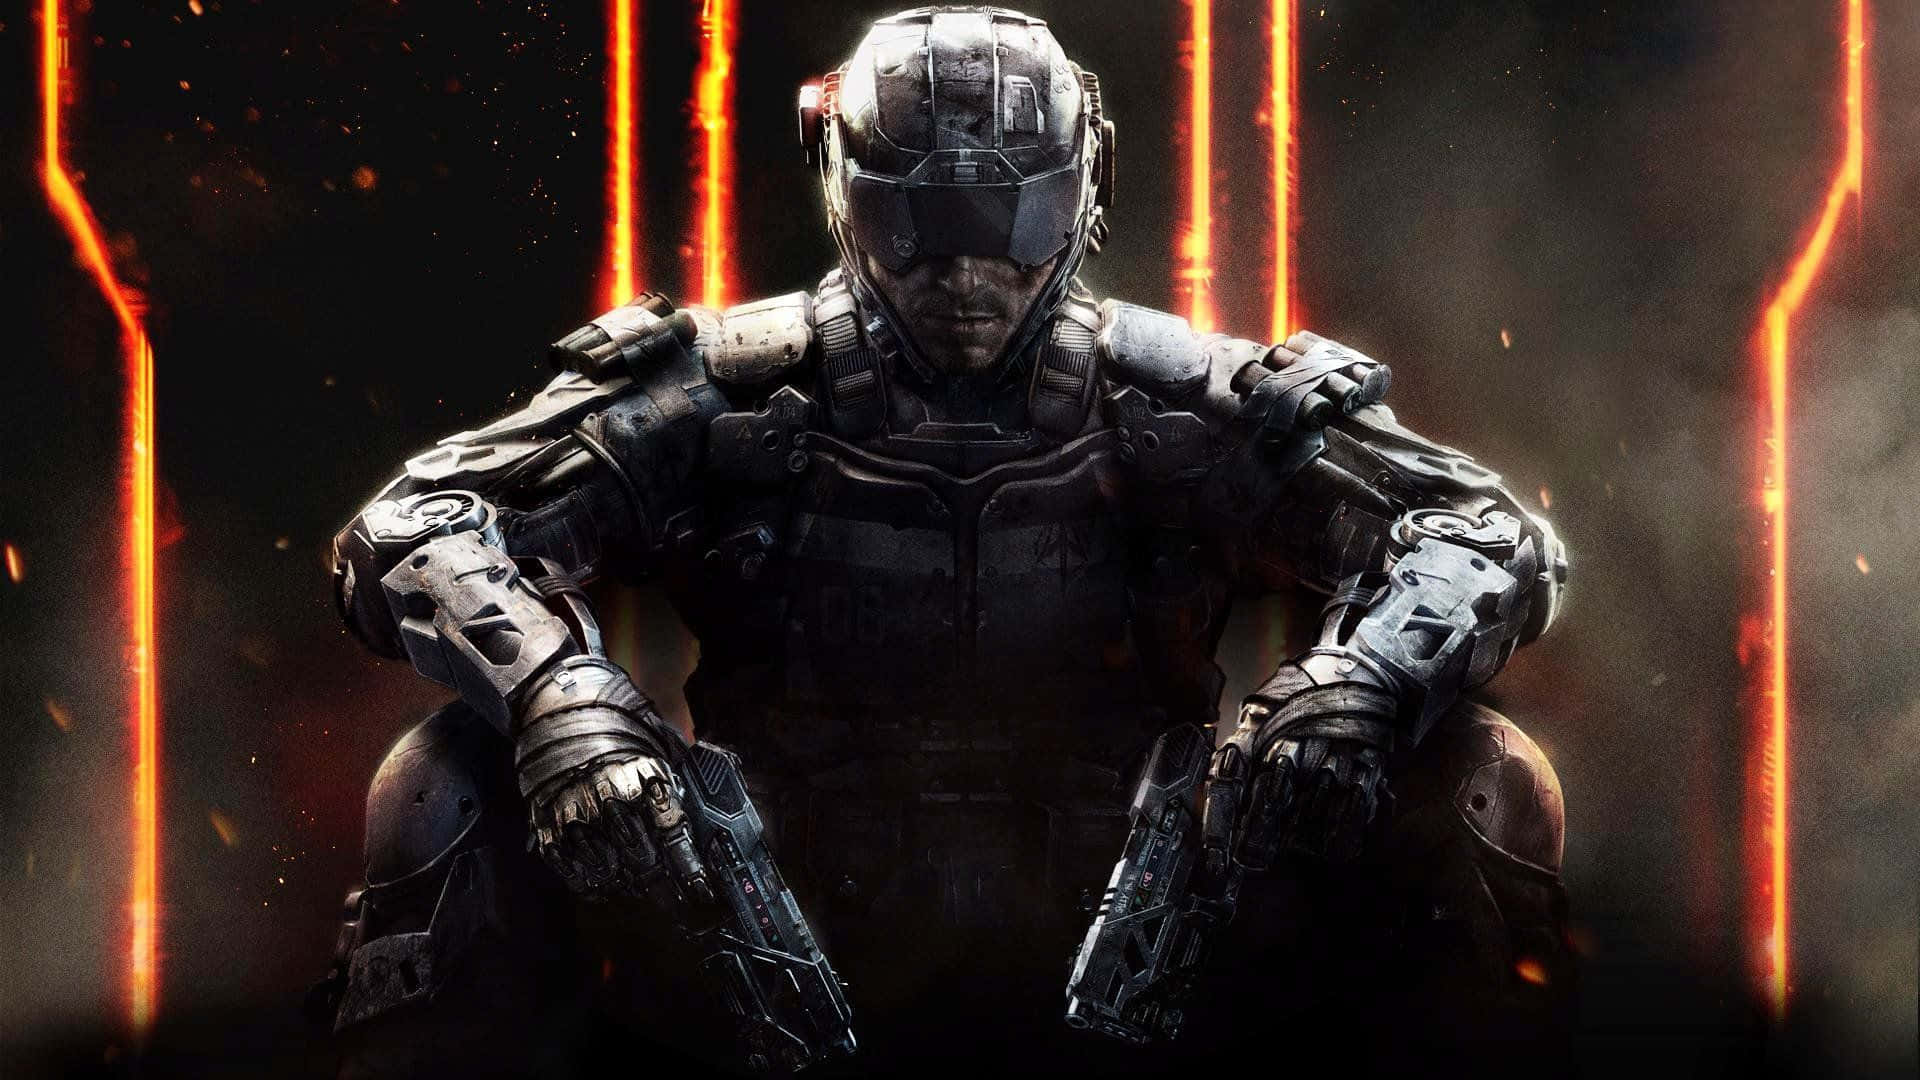 Deploy for Action in Call of Duty: Black Ops 3 Wallpaper